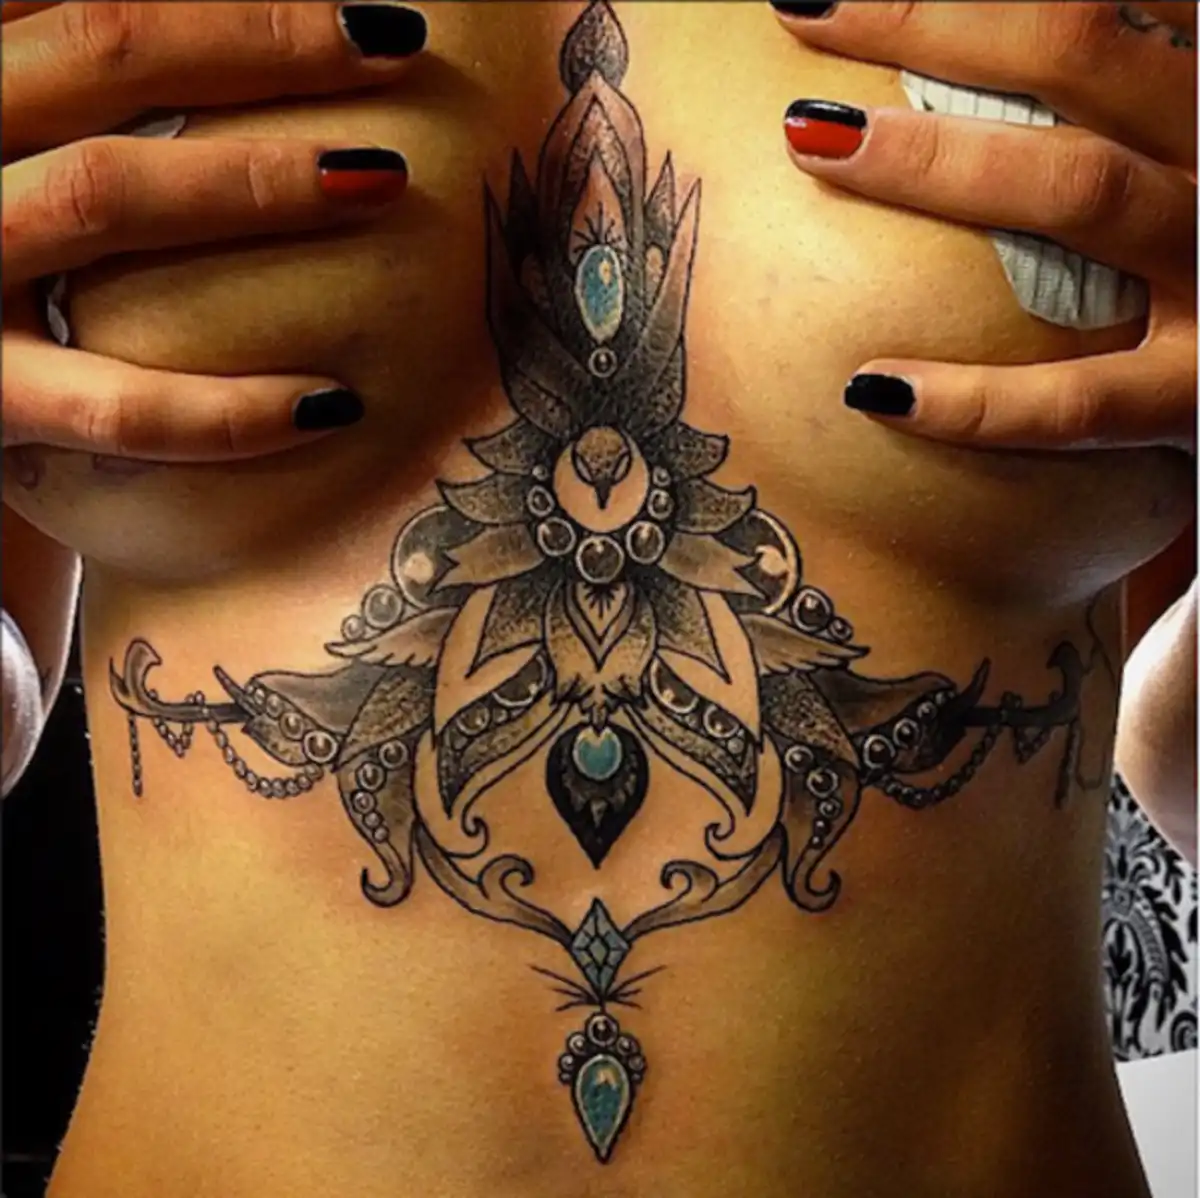 The sternum is painful for similar reasons as the chest, but the sternum also extends down to the stomach causing the painful vibrations from the chest to extend downwards, as well. Two words: not pleasant. (Tattoo by Alex Lap)